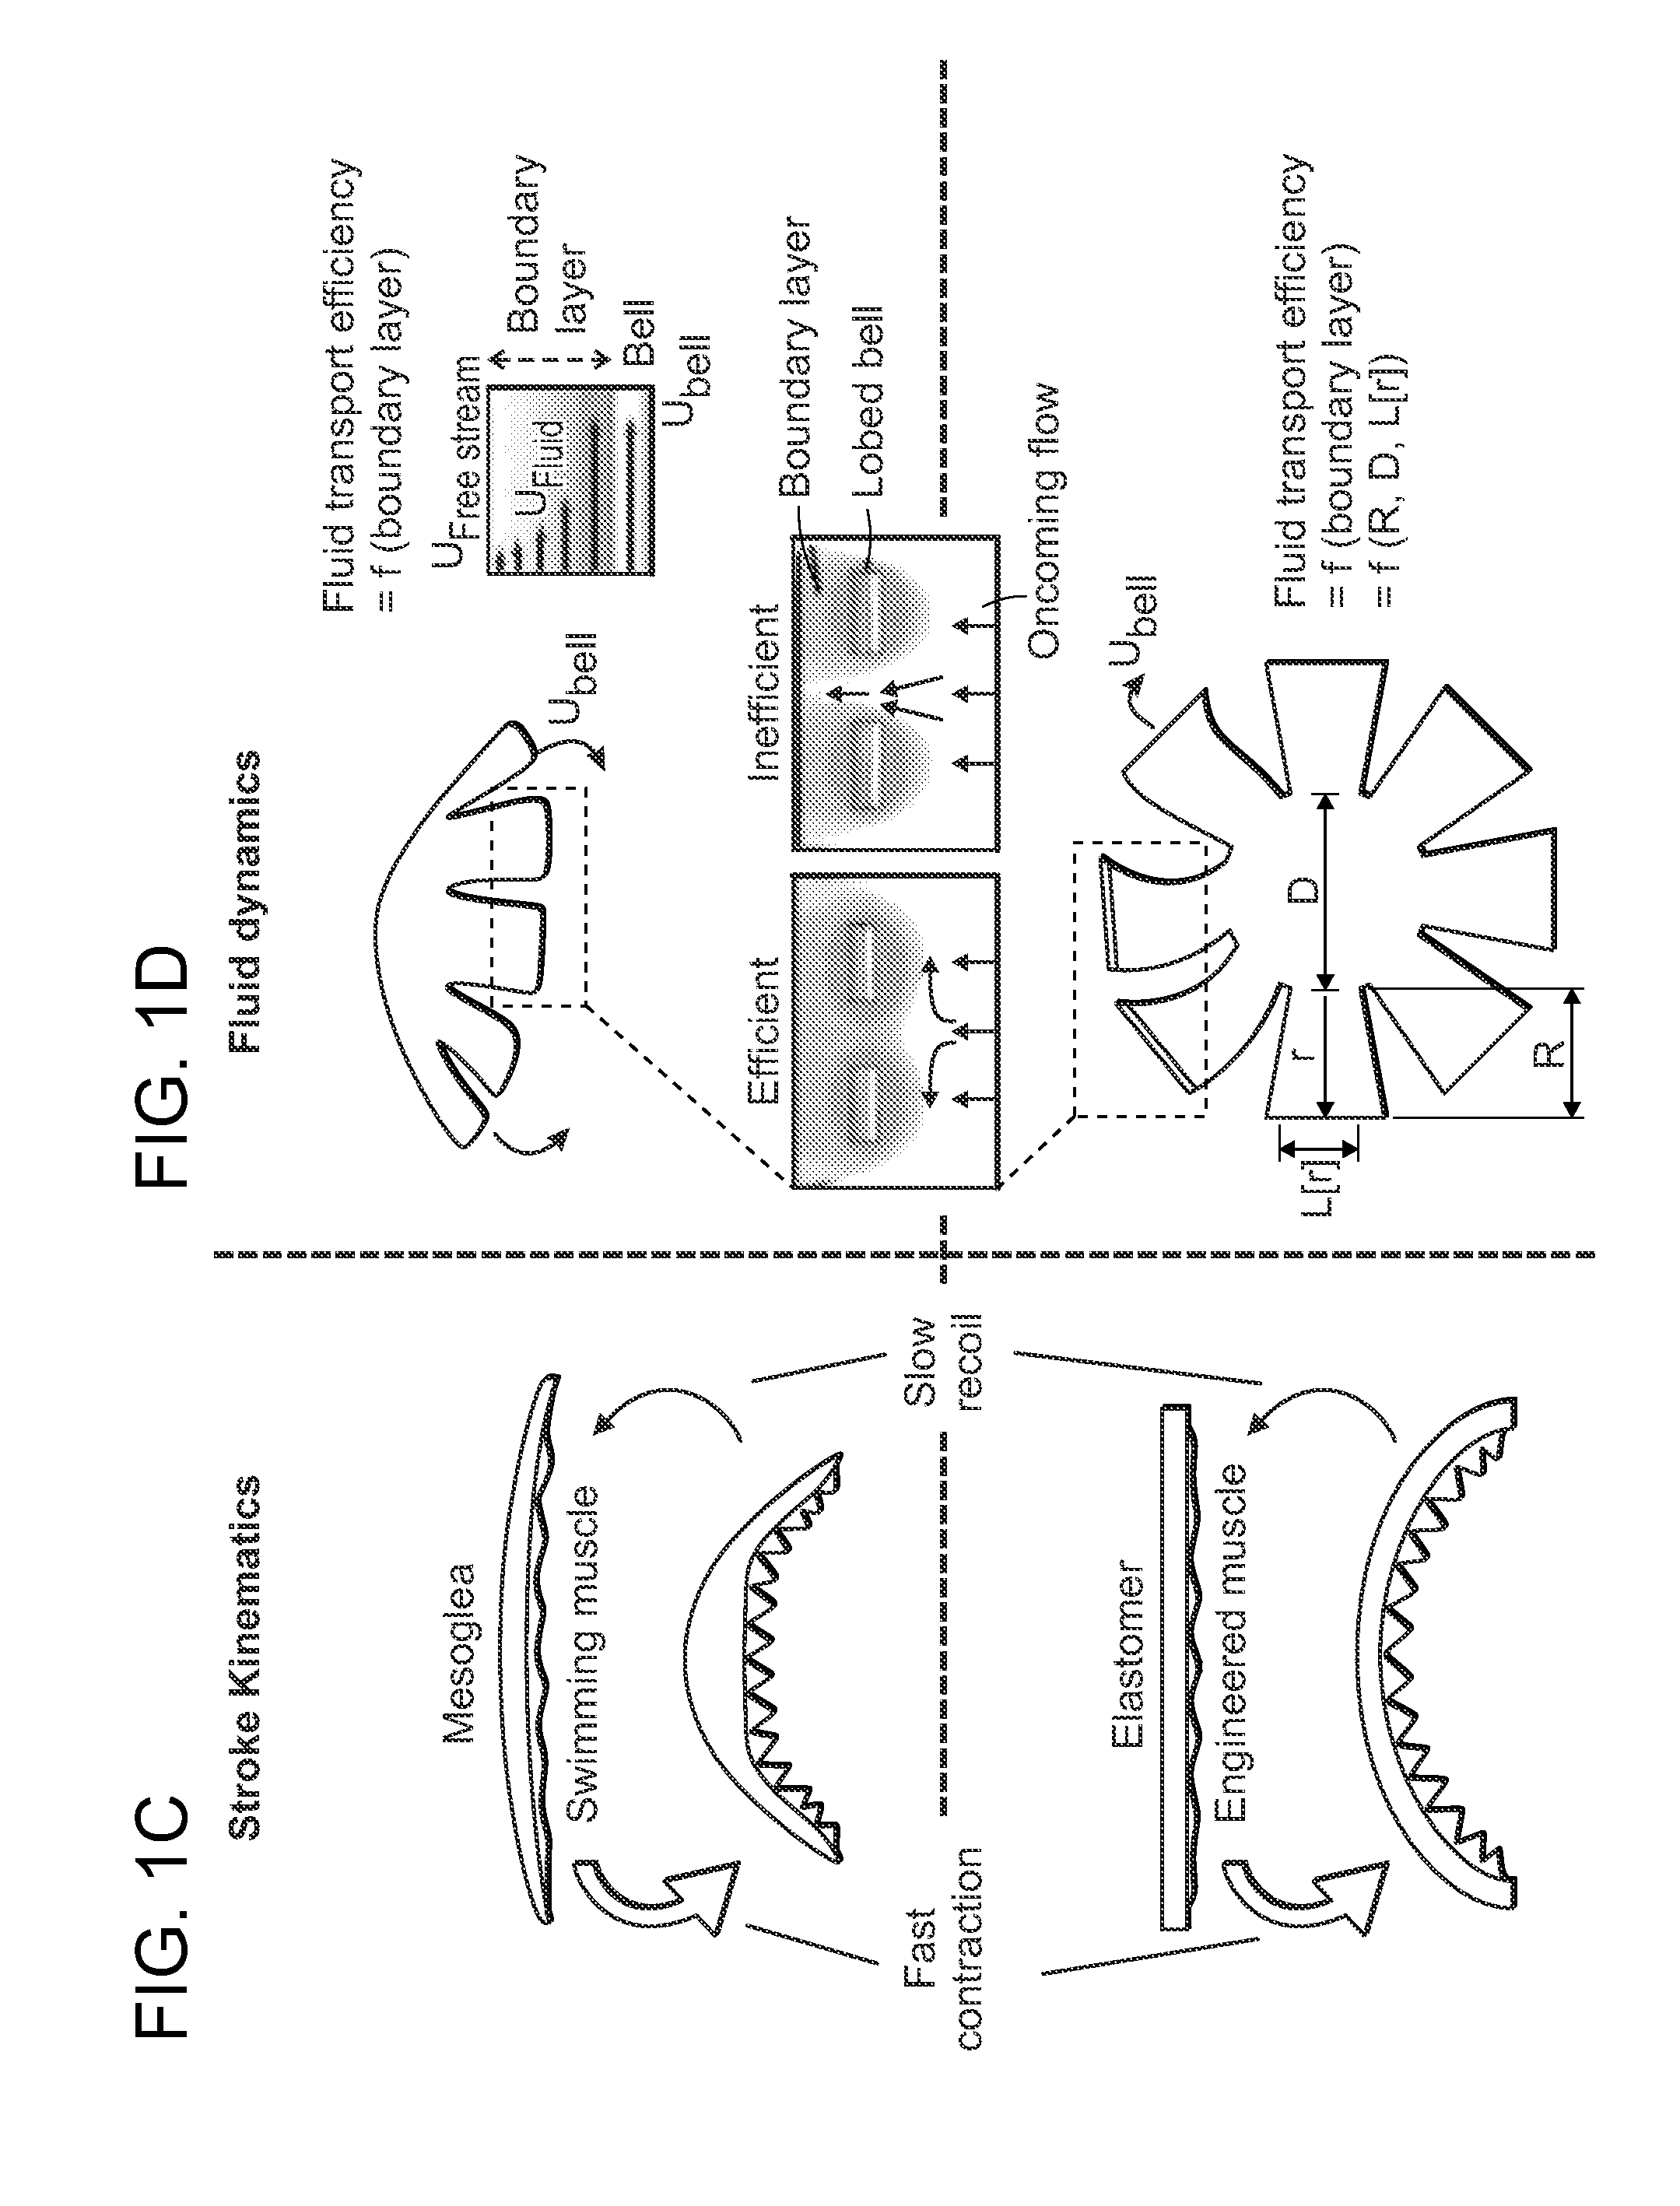 Tissue-engineered pumps and valves and uses thereof